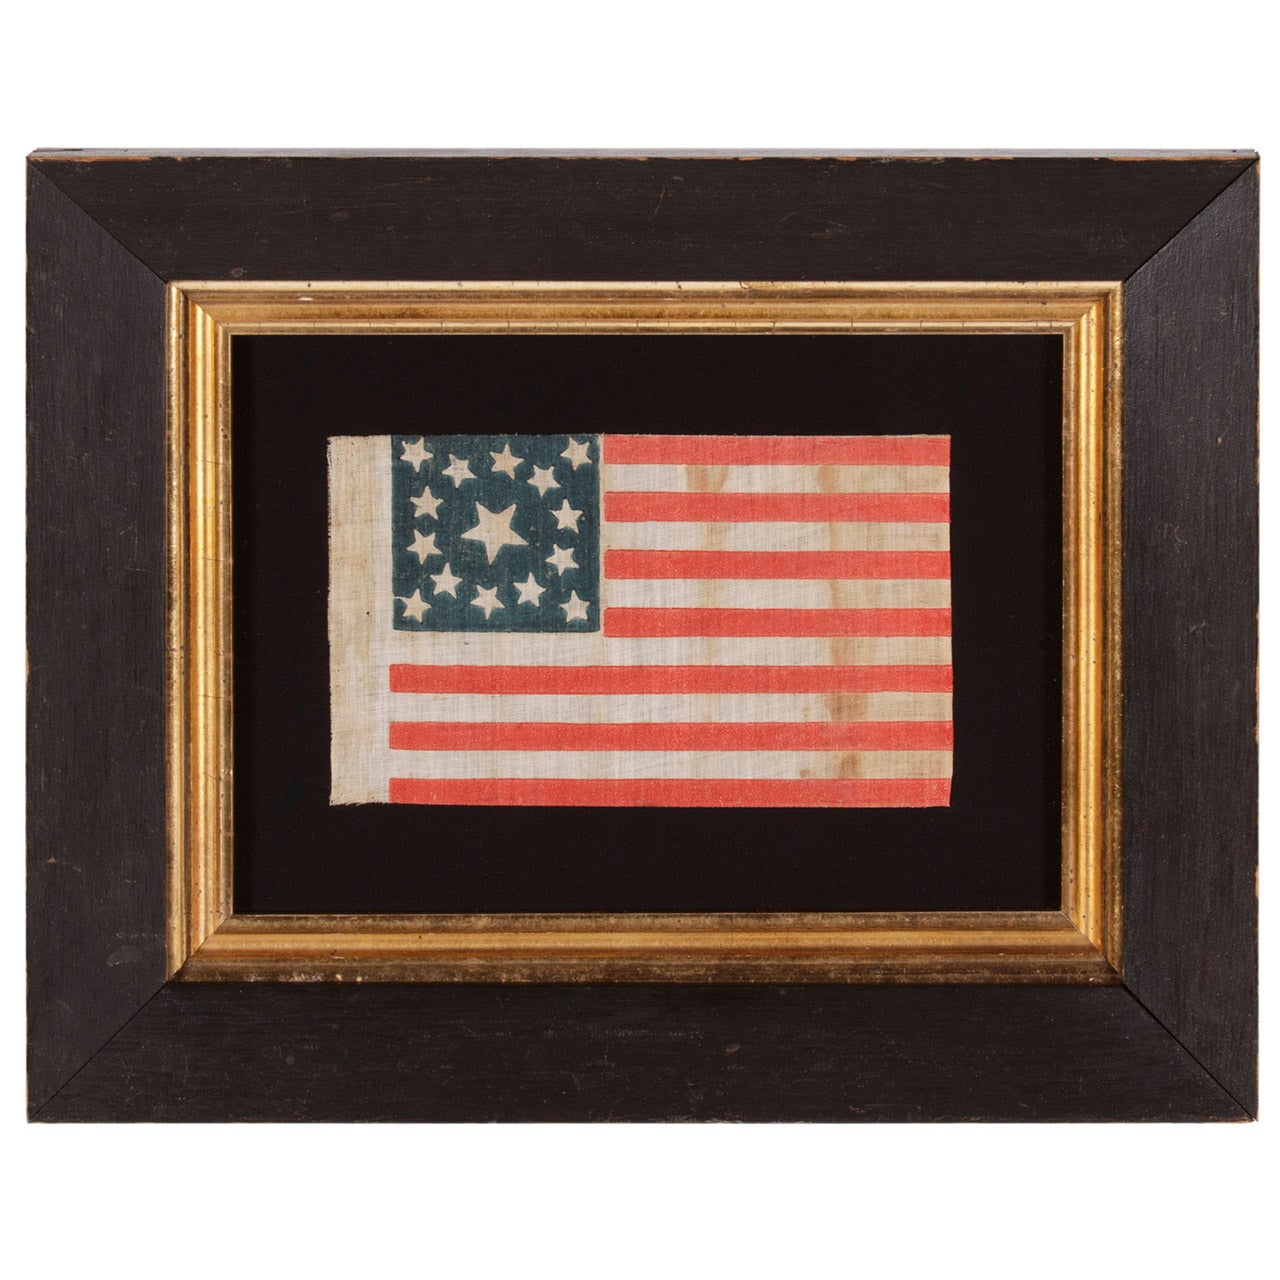 15 Star Flag, Made either to Celebrate Kentucky Statehood or Celebrate the South